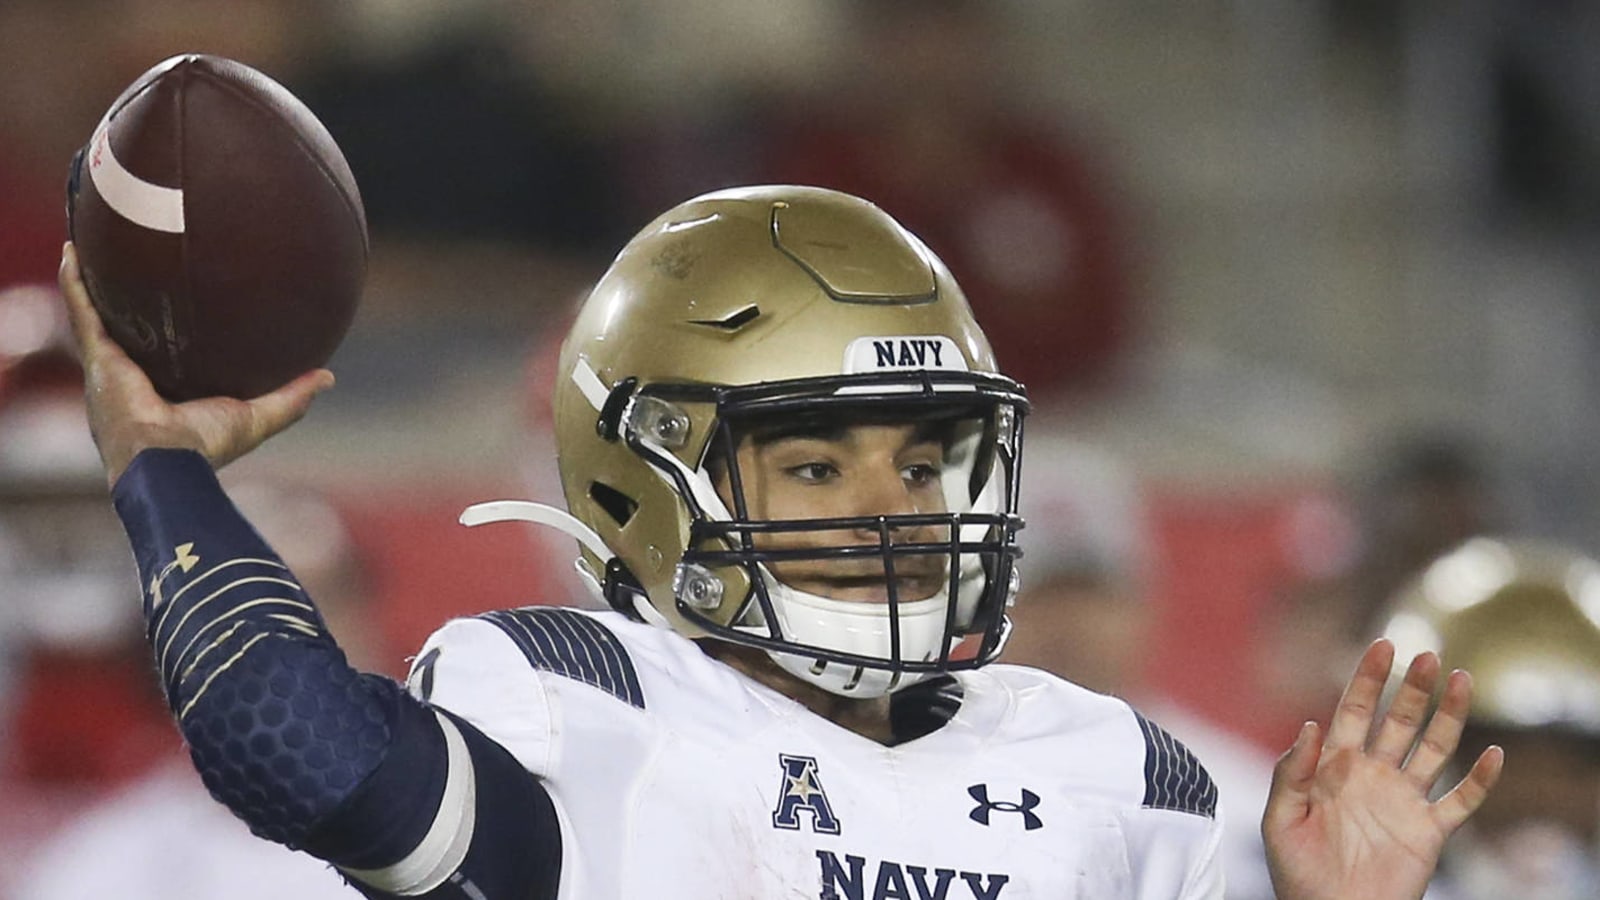 Army-Navy game preview: Five star players to watch